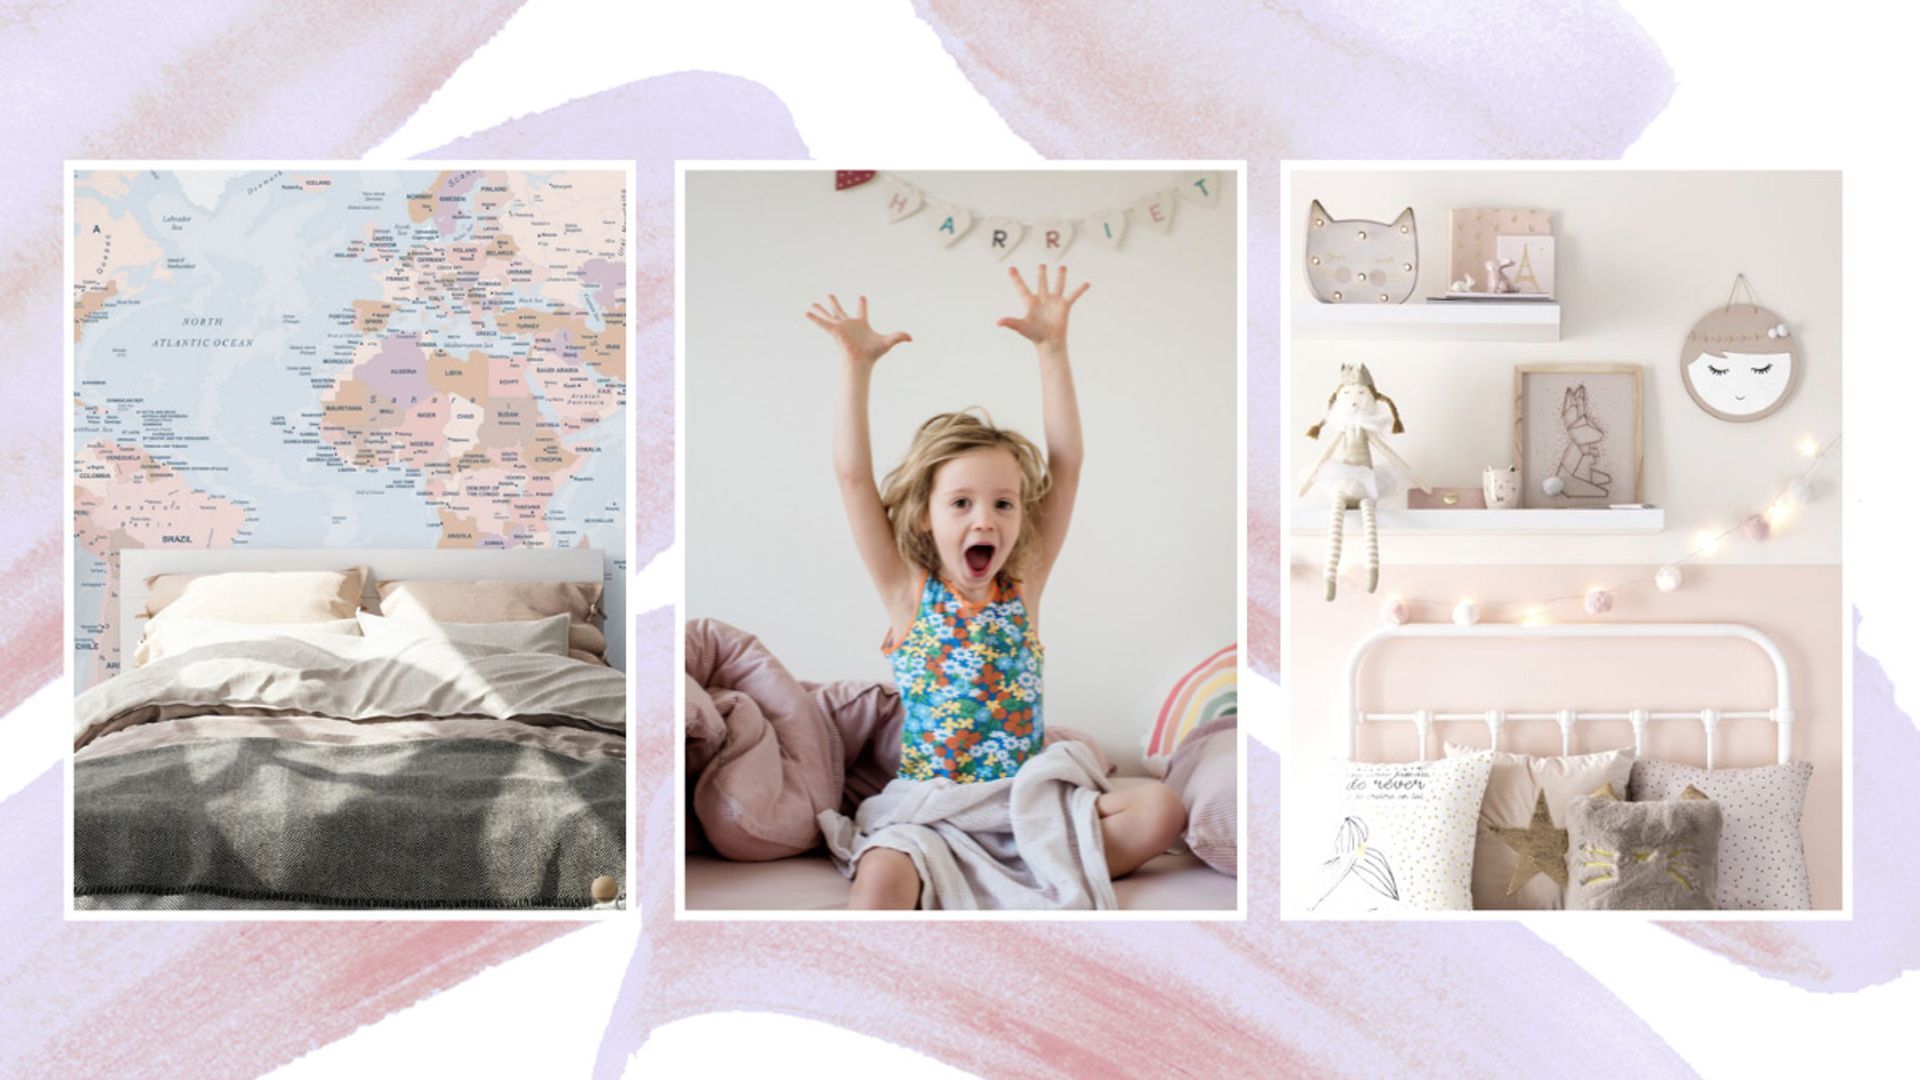 19 Girls' Bedroom Ideas for Playful, Inspiring Spaces